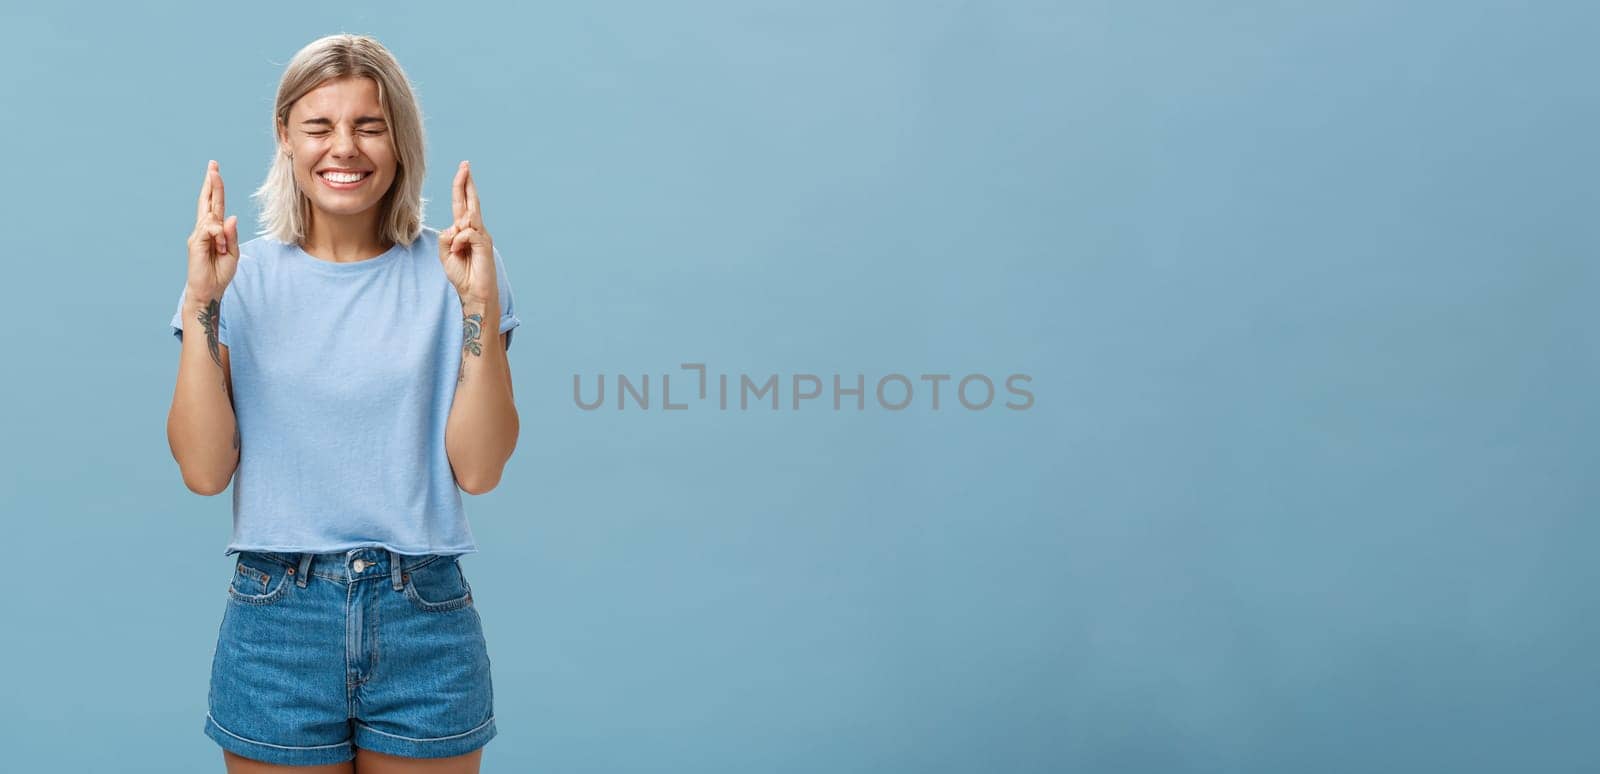 Optimistic faithful good-looking young woman with blond hair and tattoos smiling joyfully crossing fingers for good luck waiting for dream come true making wish while standing over blue background by Benzoix